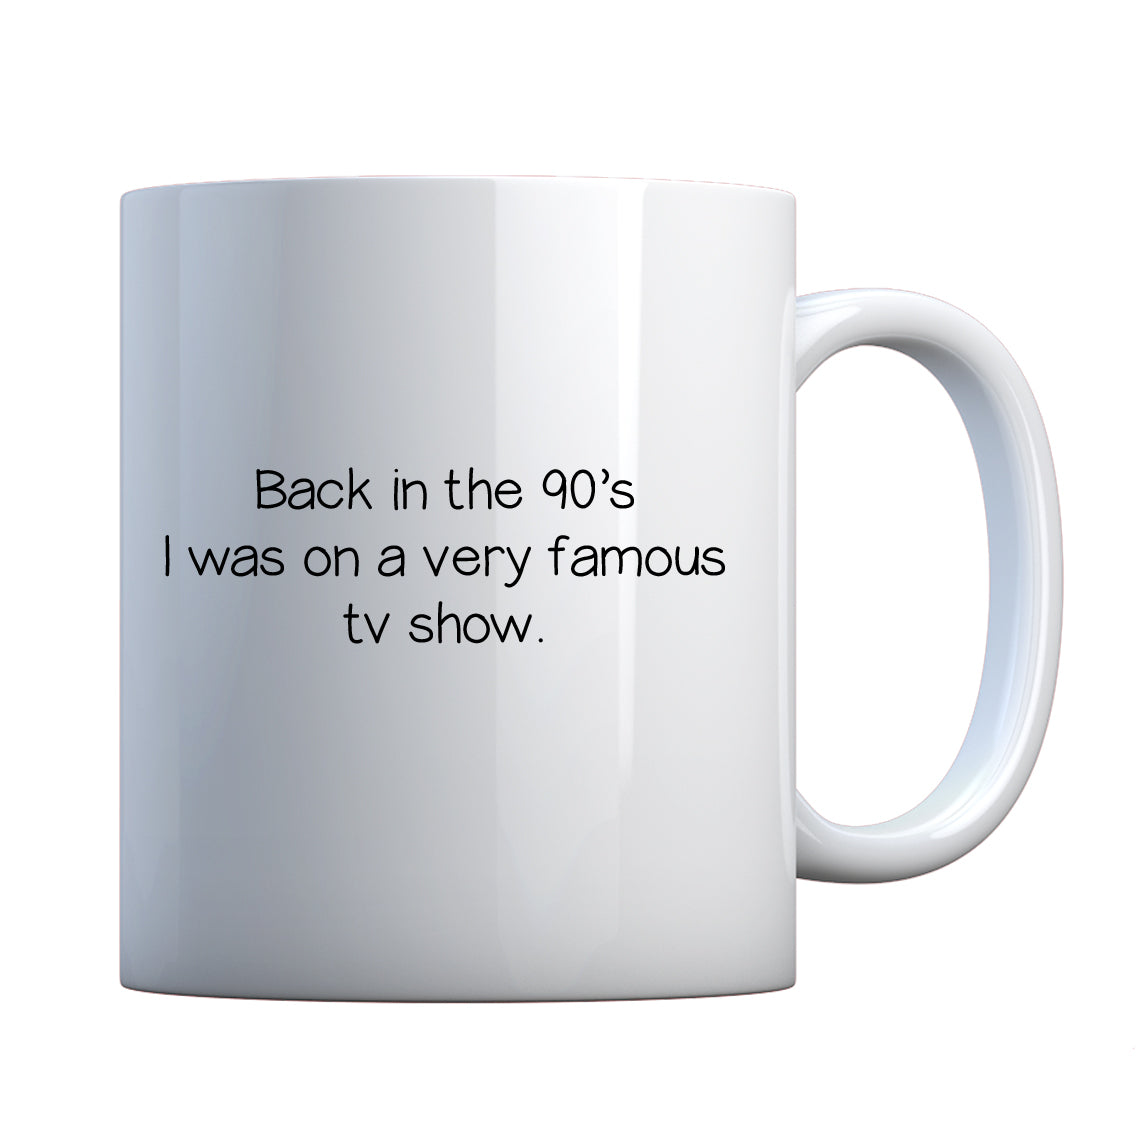 Back in the 90s I was on a very famous TV show Ceramic Gift Mug